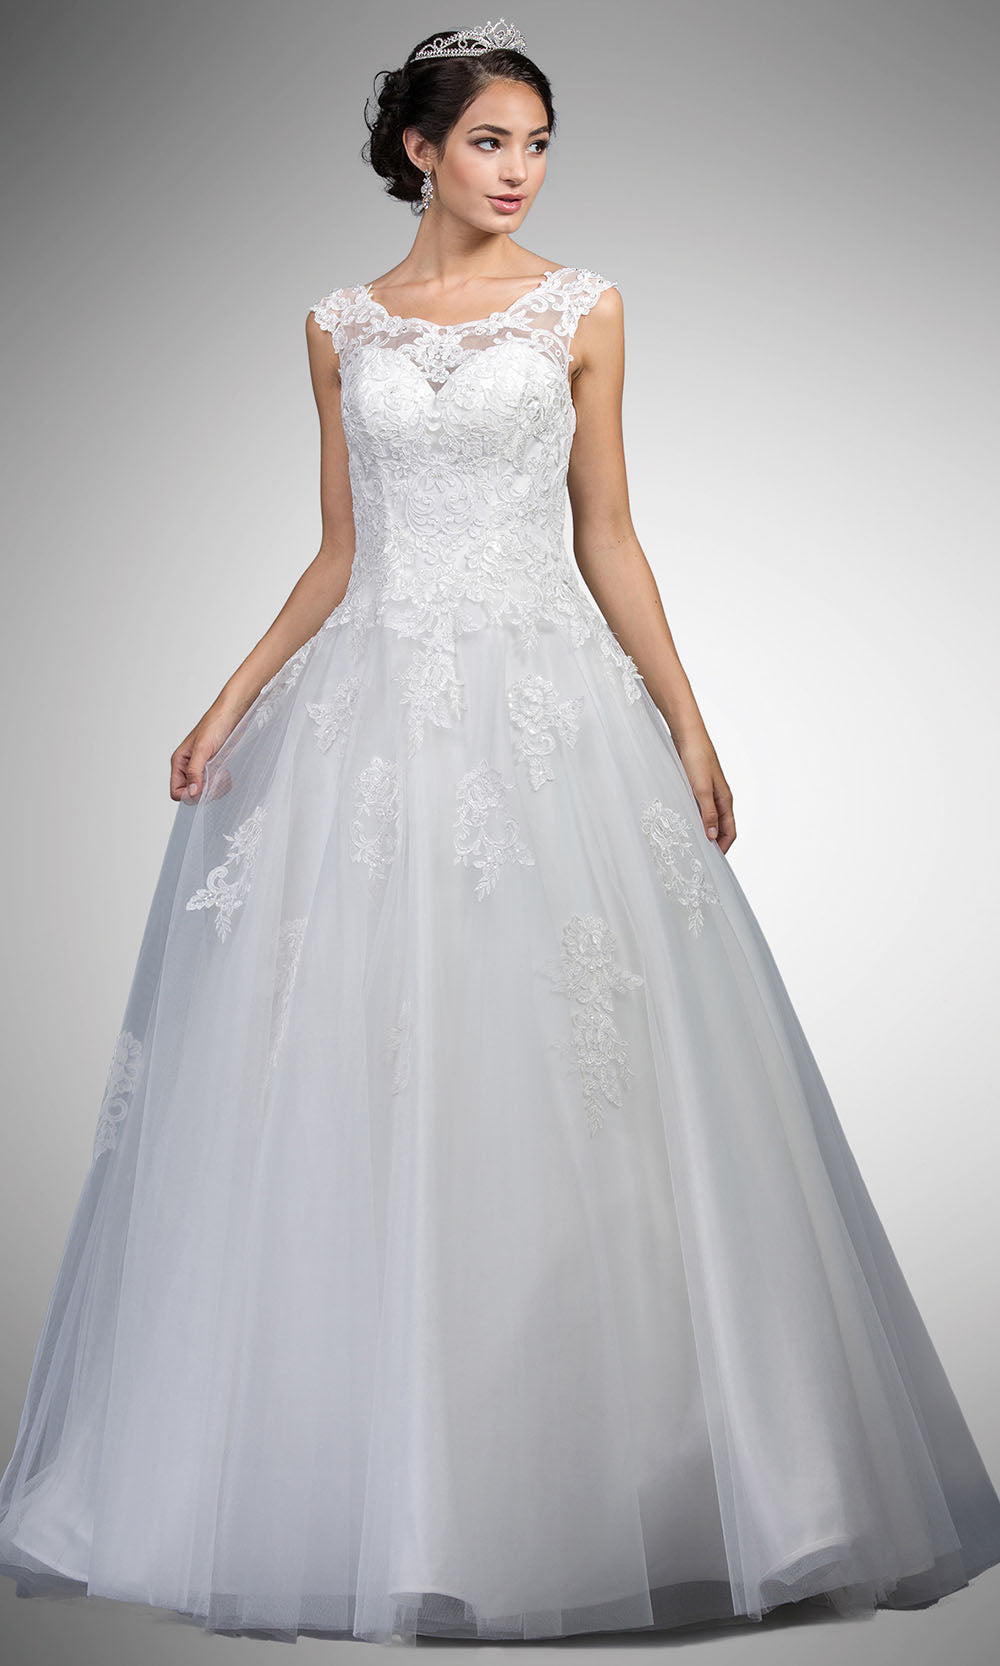 Dancing Queen - A7002 Long Lace Embraided Dress In White